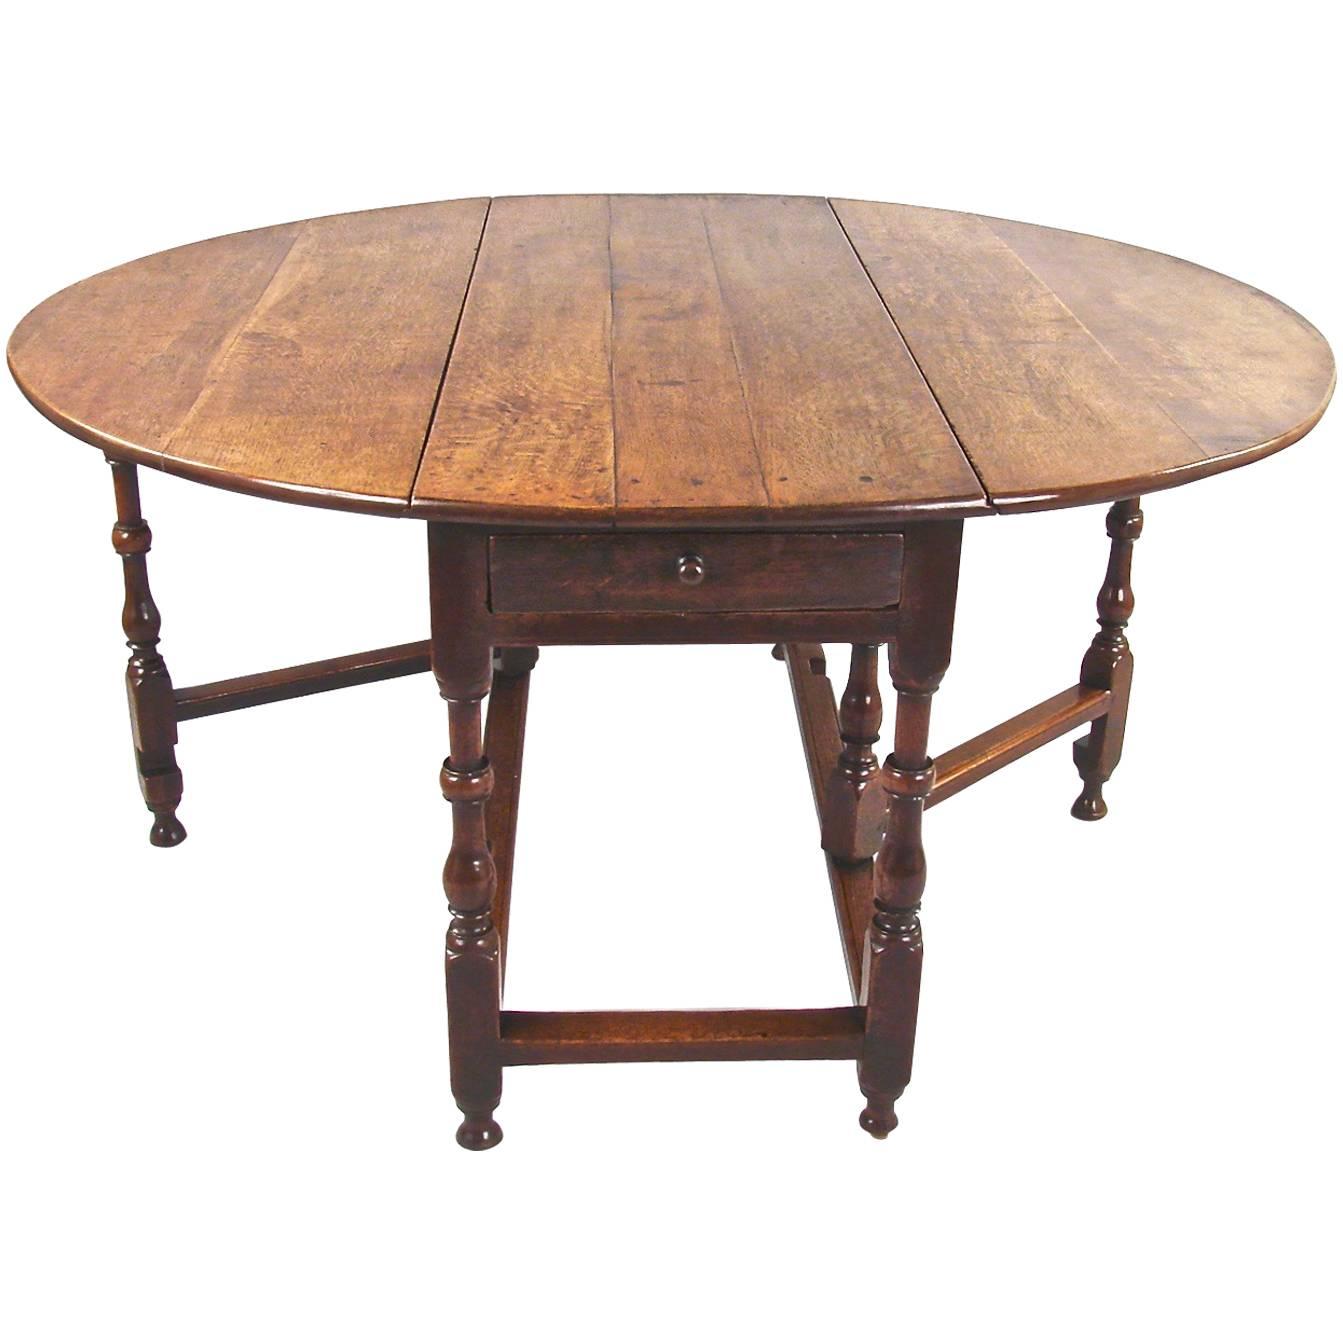 English Late 17th Century Oak Drop-Leaf Table with Drawer